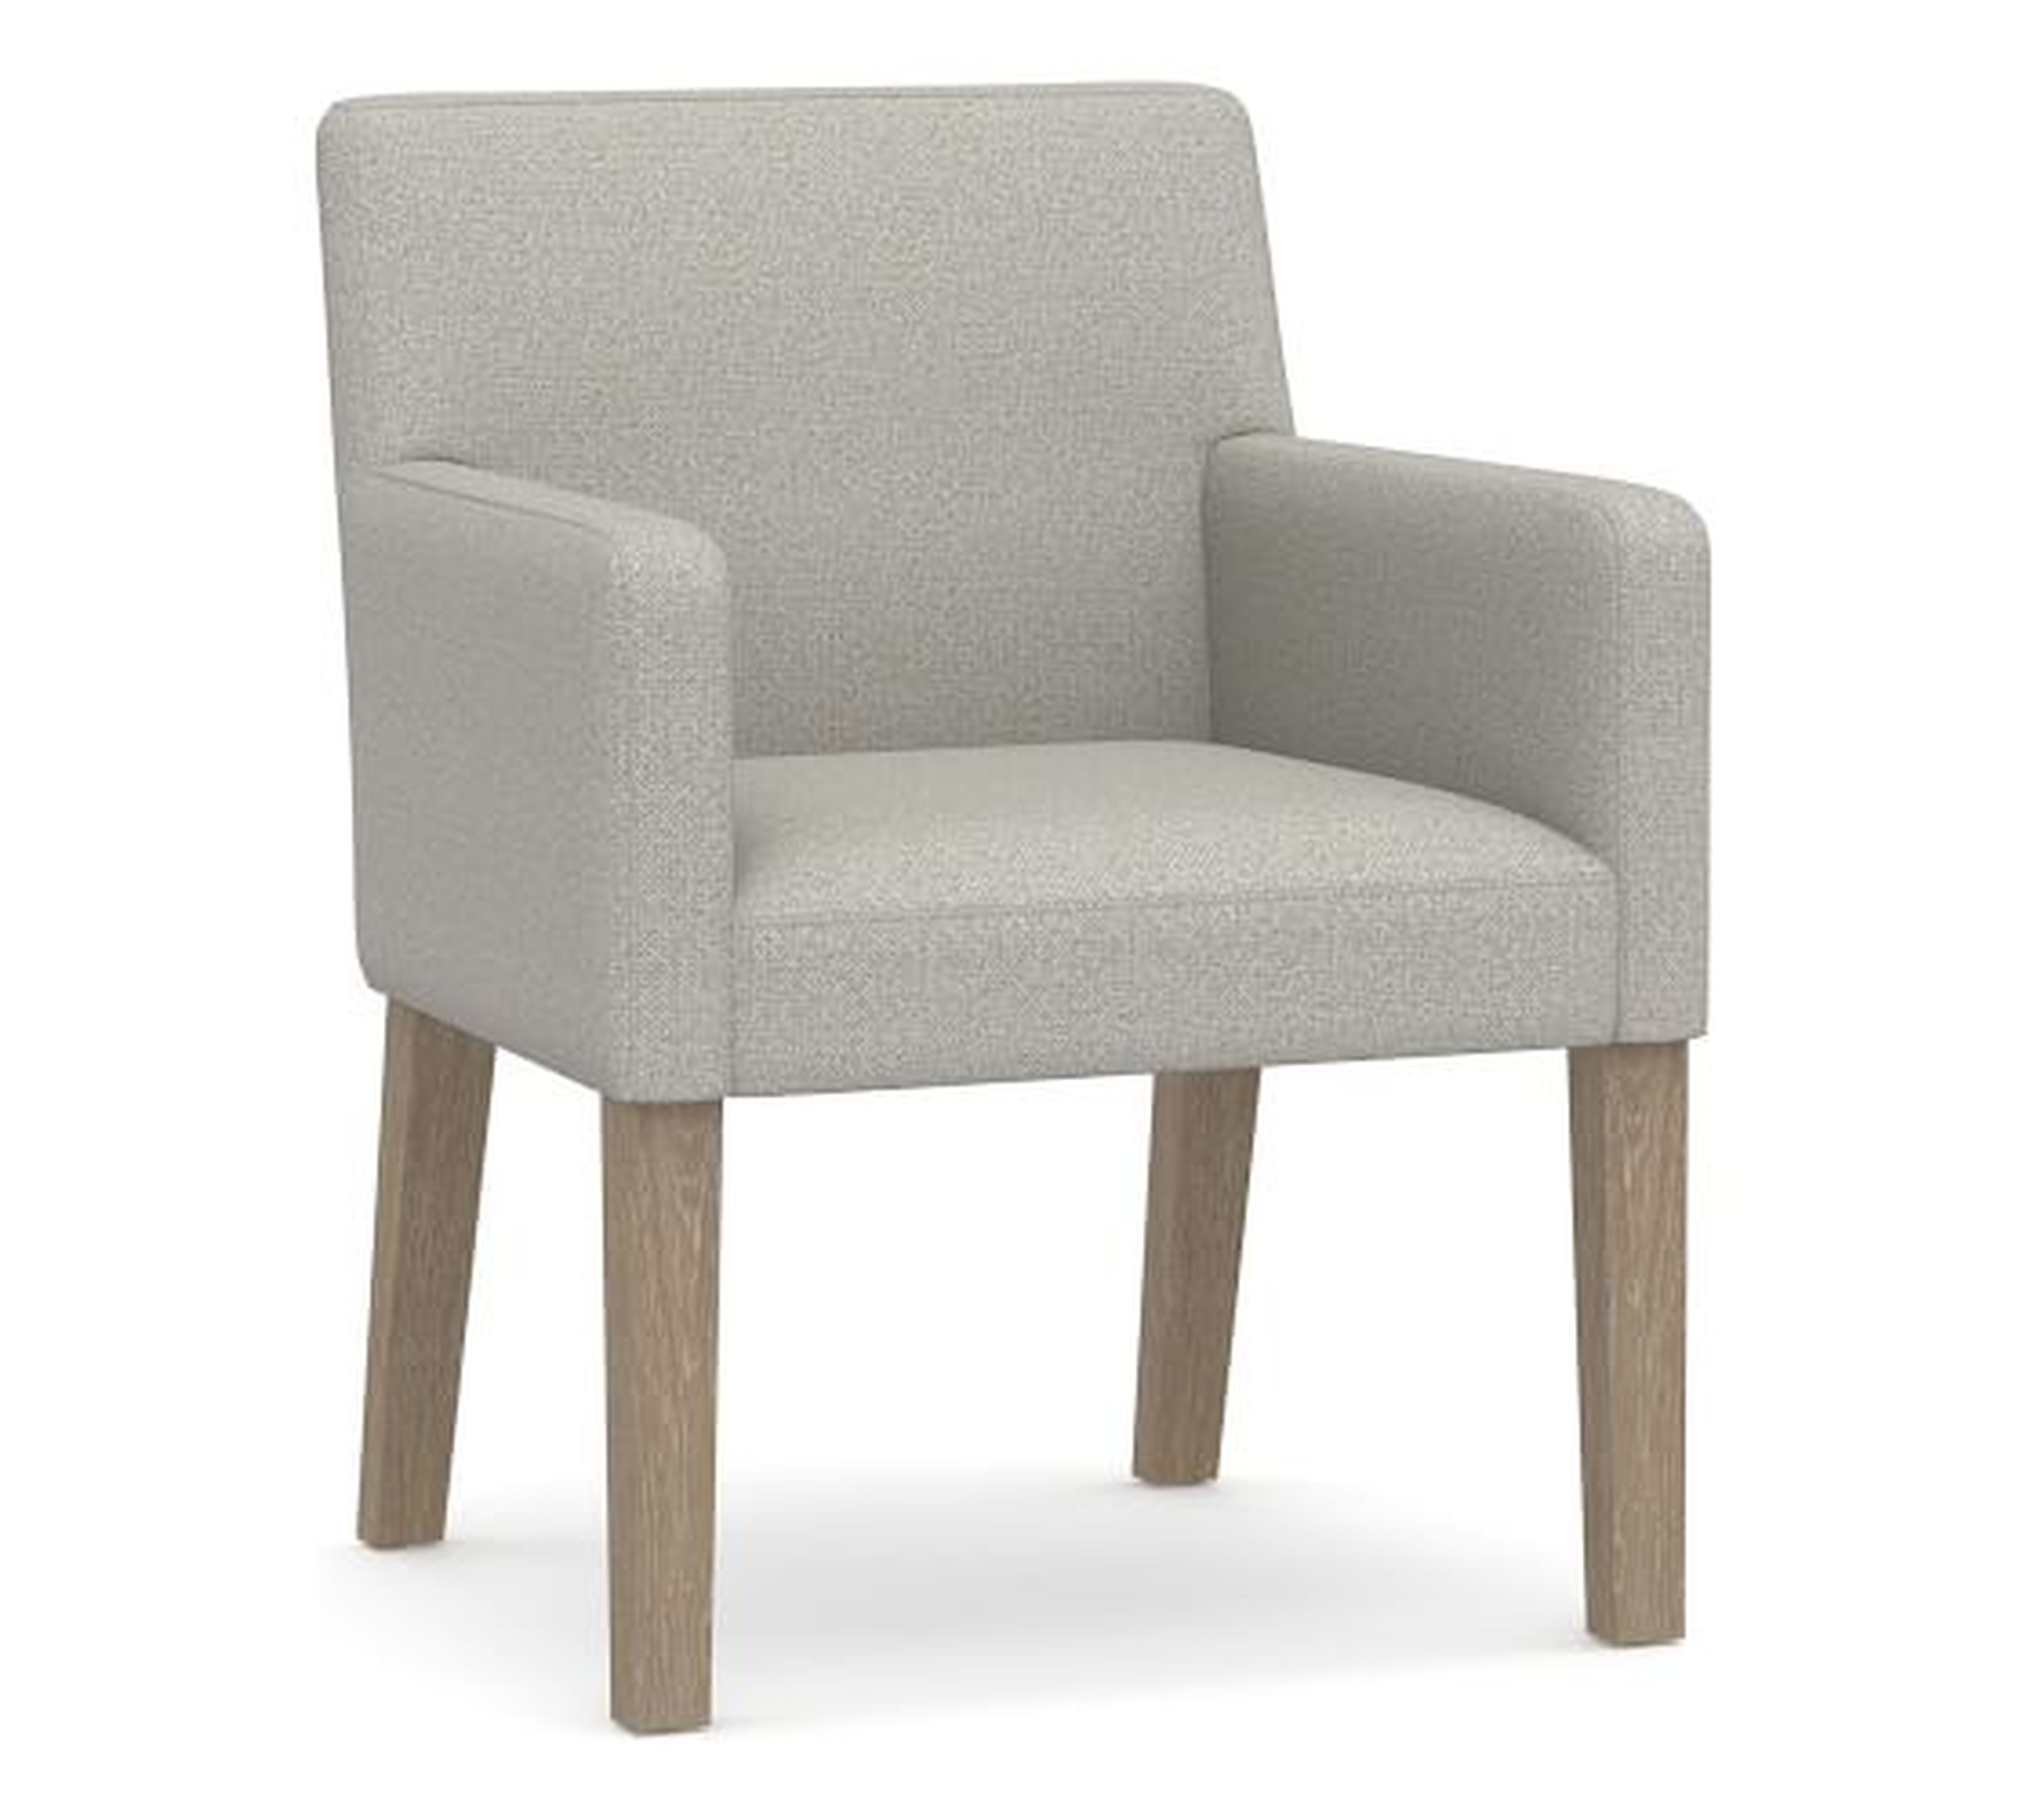 Classic Upholstered Dining Armchair, Seadrift Legs, Performance Boucle Pebble - Pottery Barn